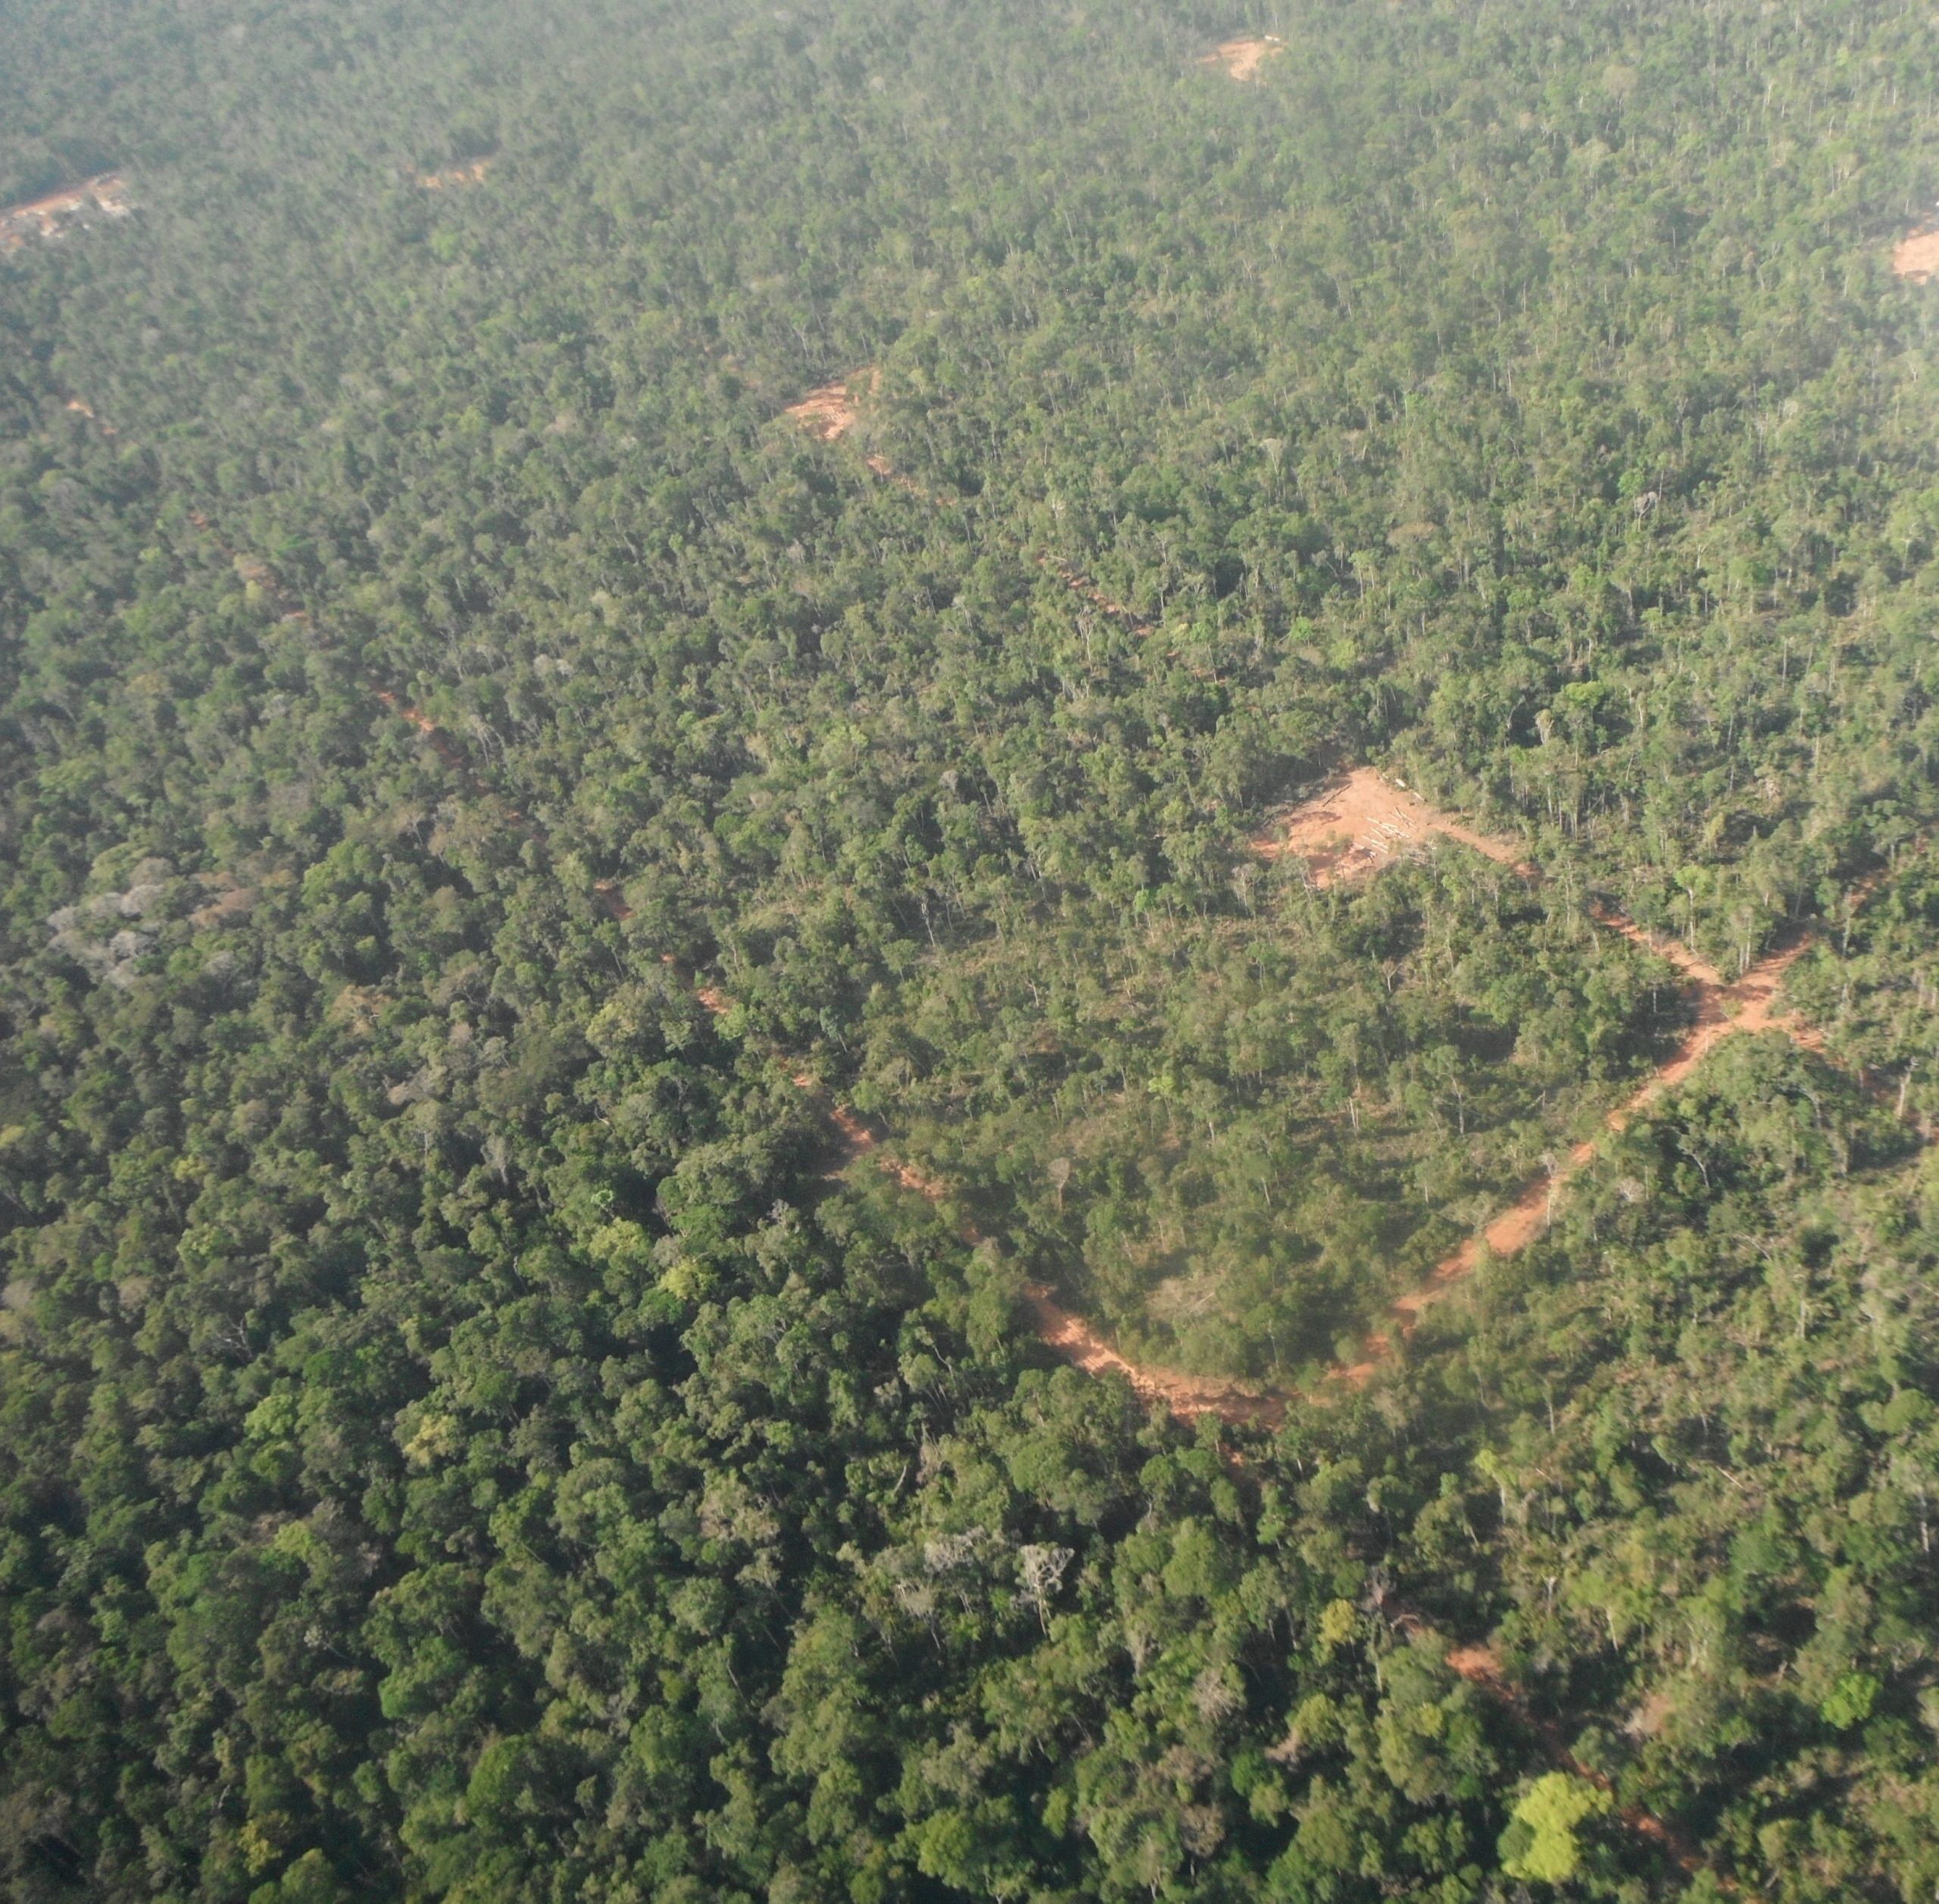 Logged forest in the Amazon